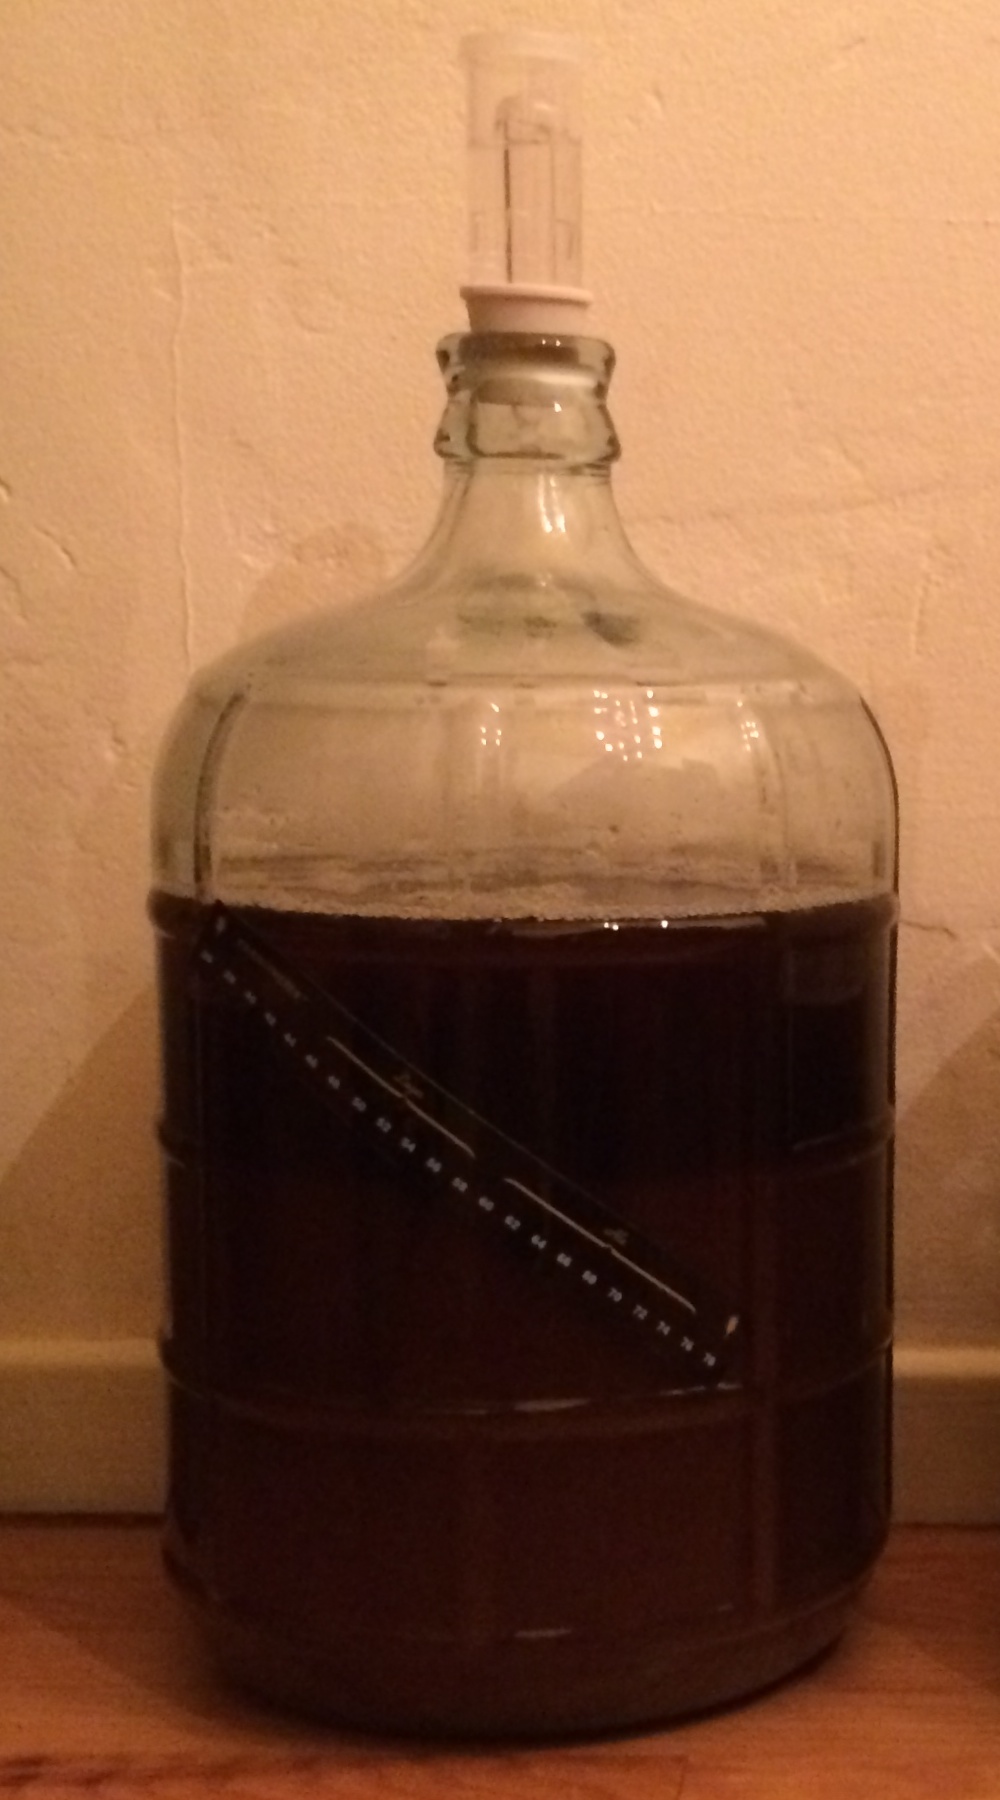 Batch 8 just after siphoning into carboys